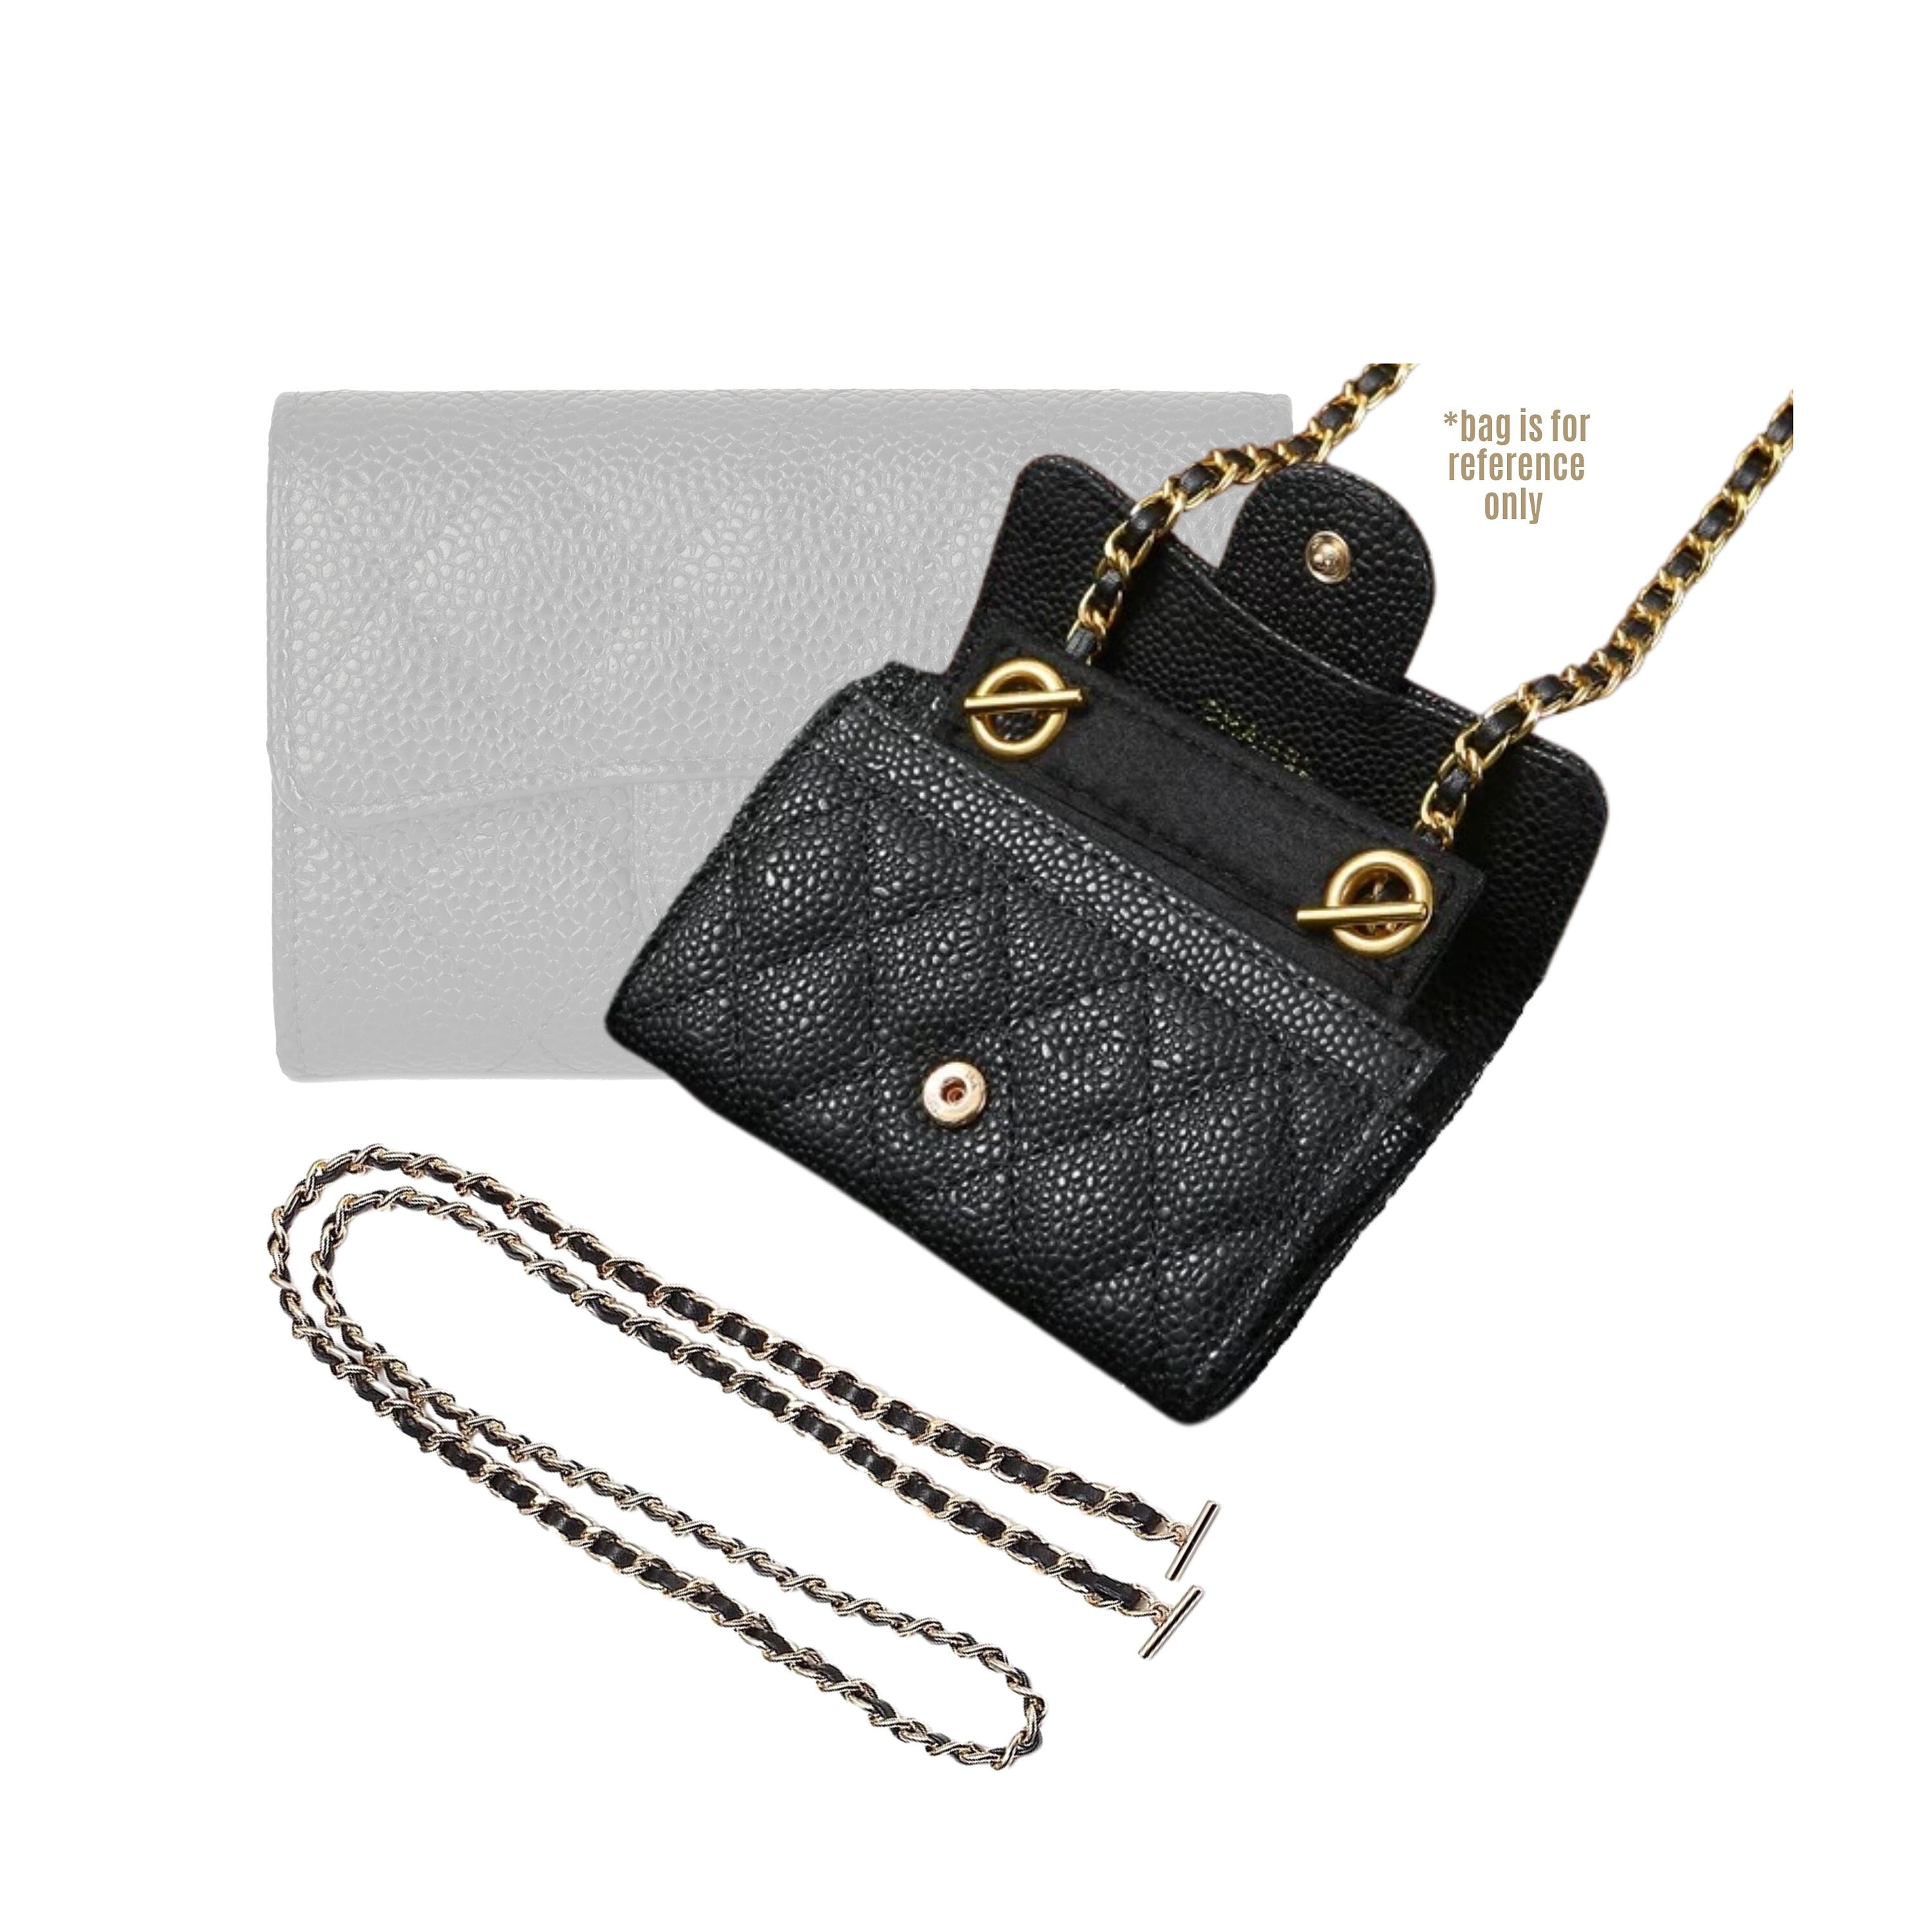 Pouch Converter Kit with Leather Strap for Chanel Pouch, LV Neverfull Pouch,  Key Pouch – Luxegarde